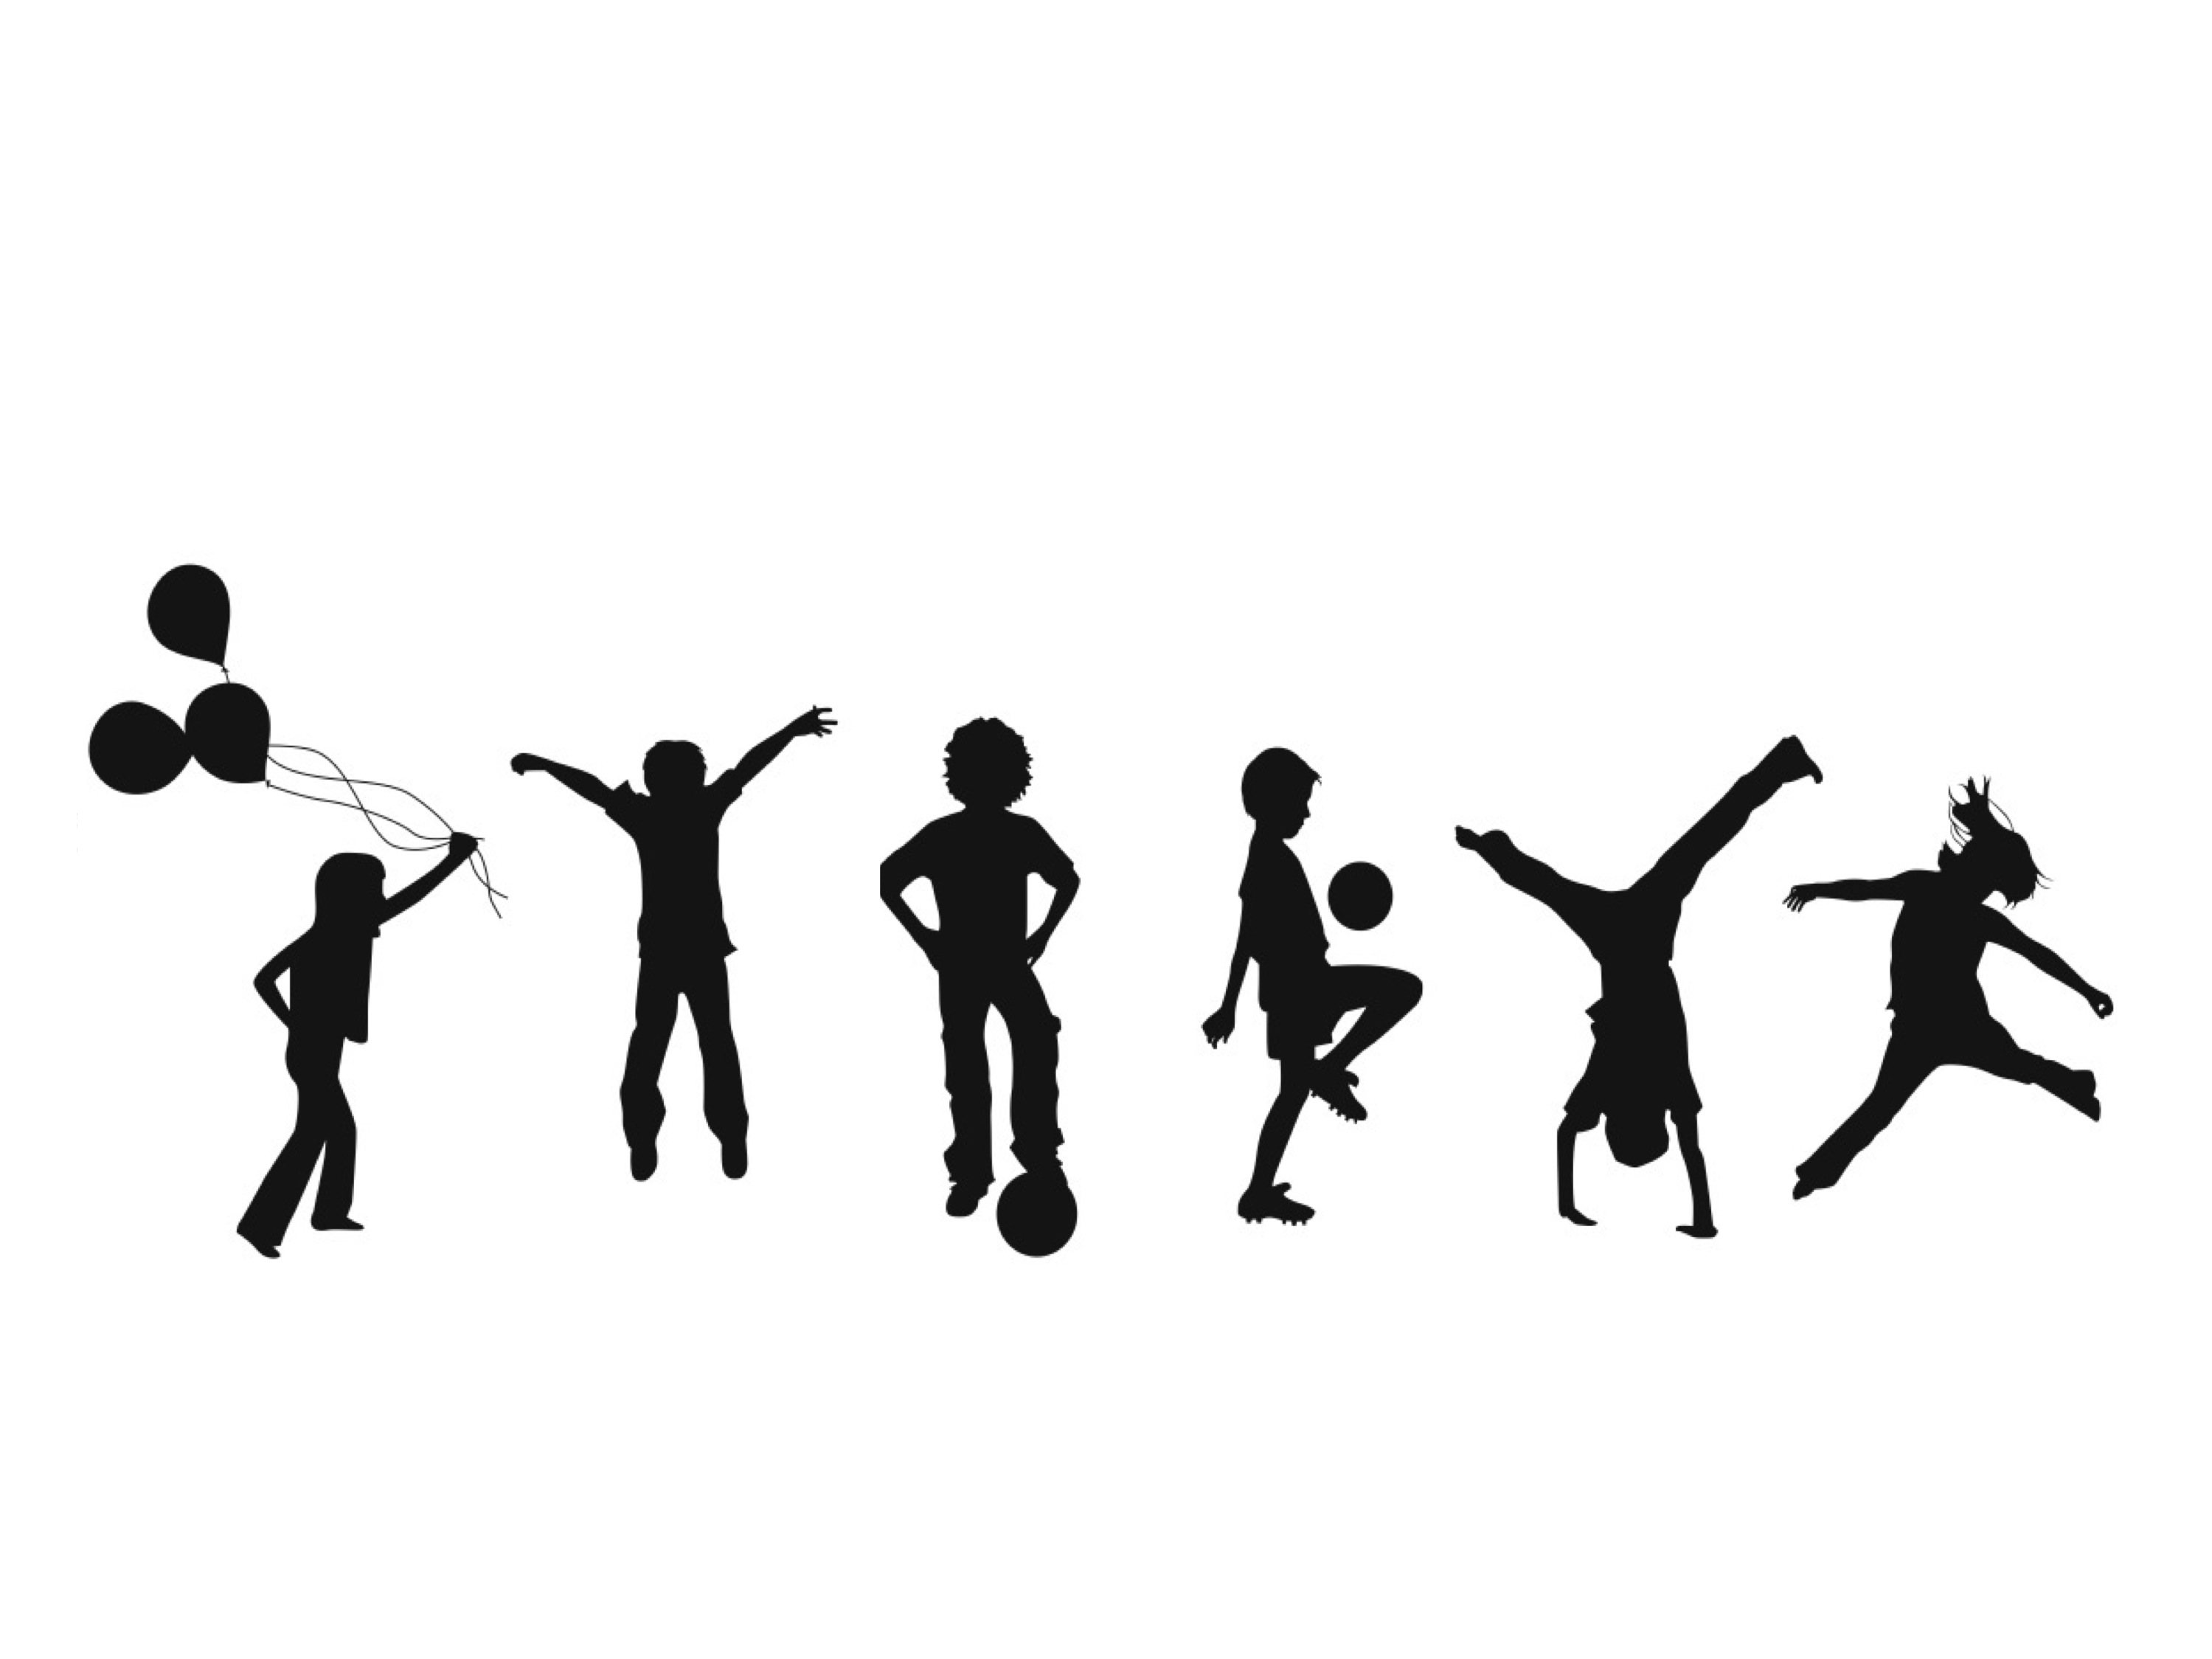 Children Playing Football Silhouette - Silhouettes of children playing ...